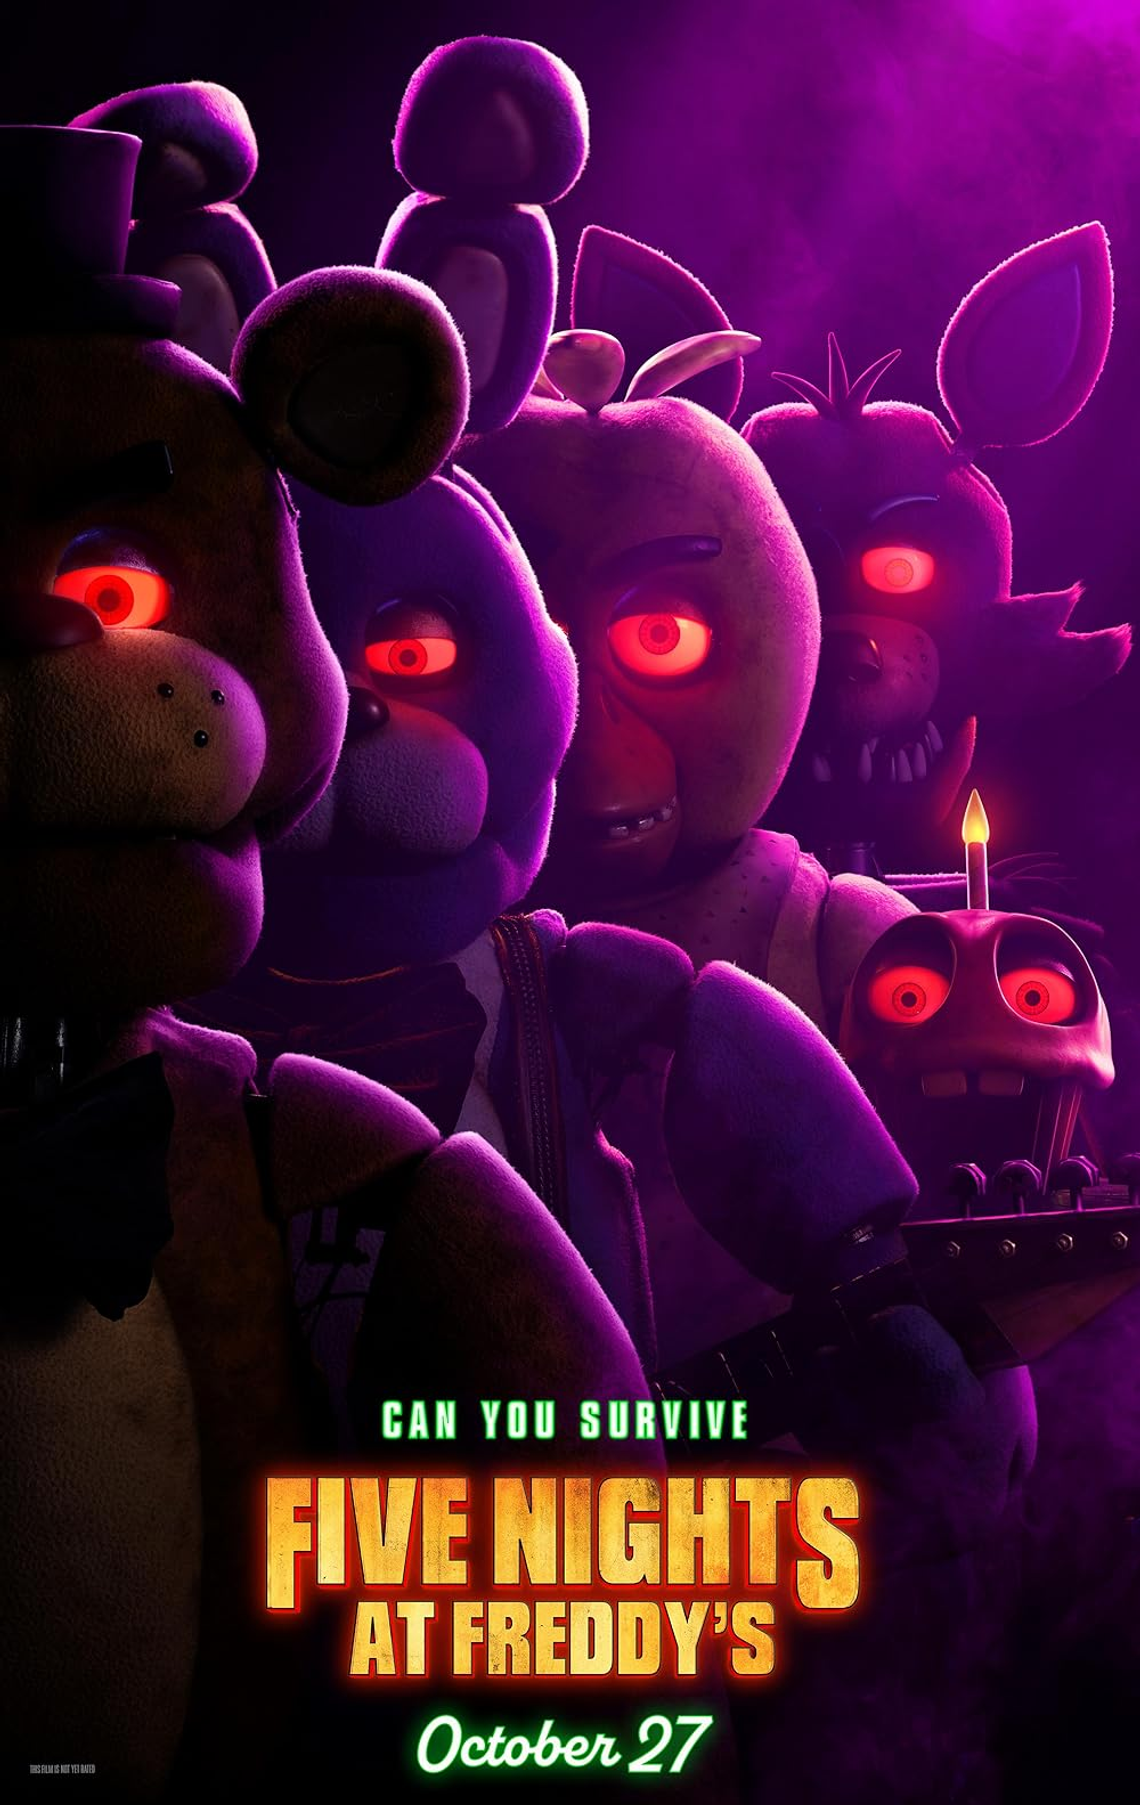 Movie Review: “Five Nights at Freddy’s”